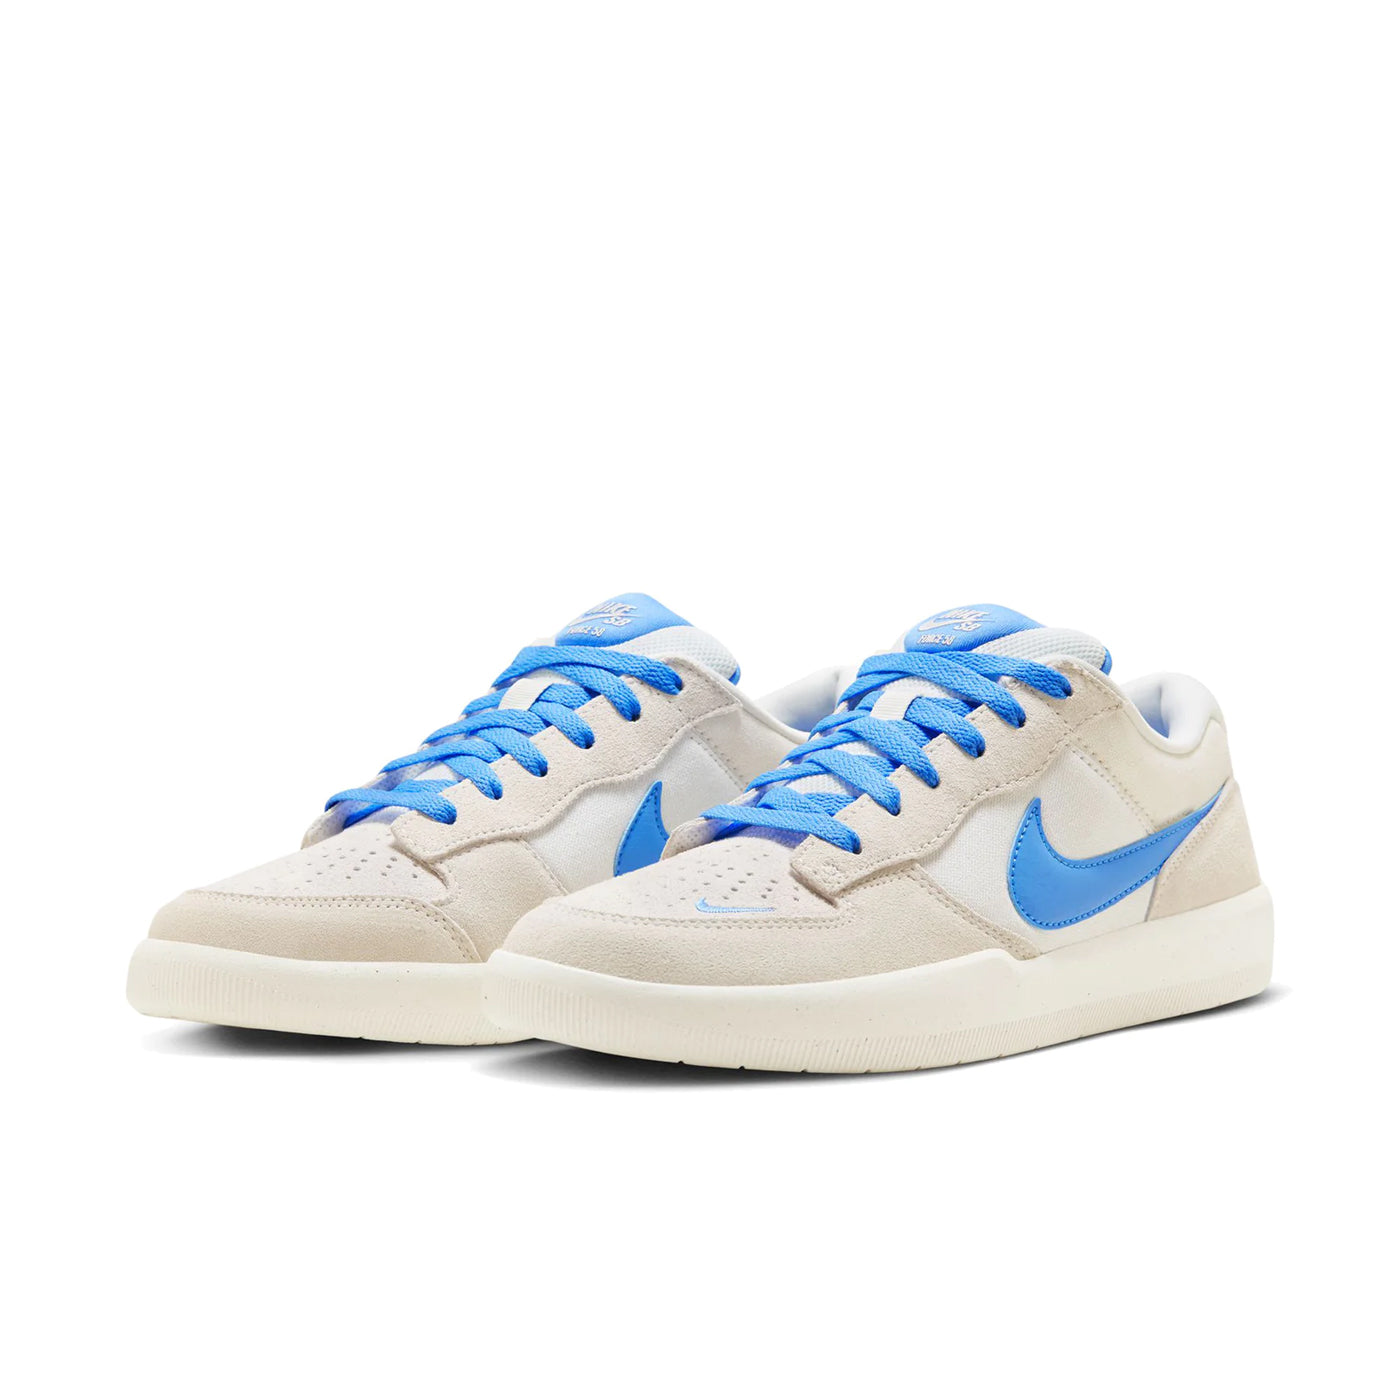 Low top Nike SB Force 58 Premium skate shoes, in white colourway with blue Nike swoosh on sides.